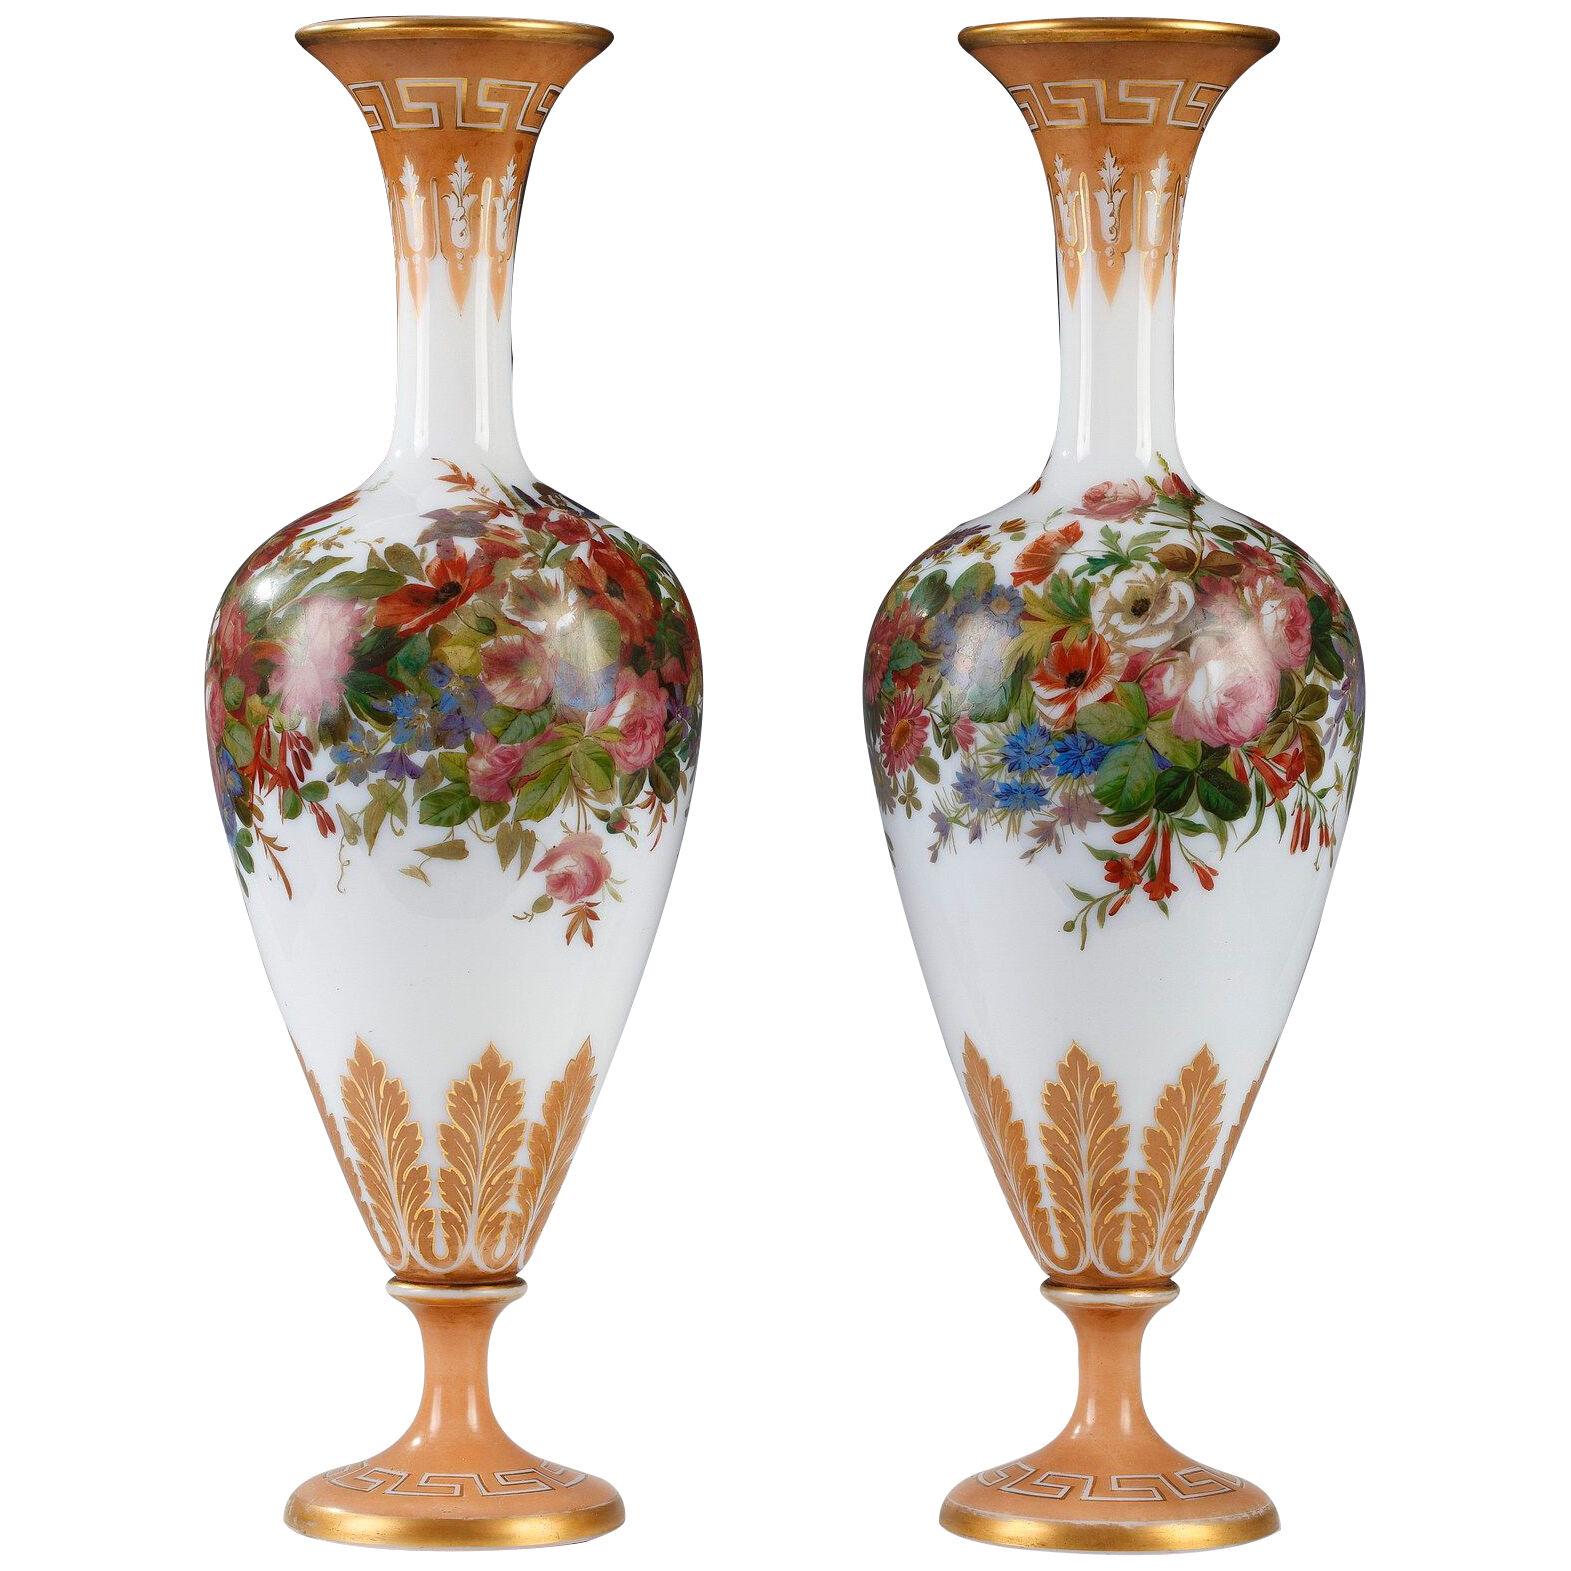 Pair of Opaline Glass Vases by Baccarat, France, Circa 1870